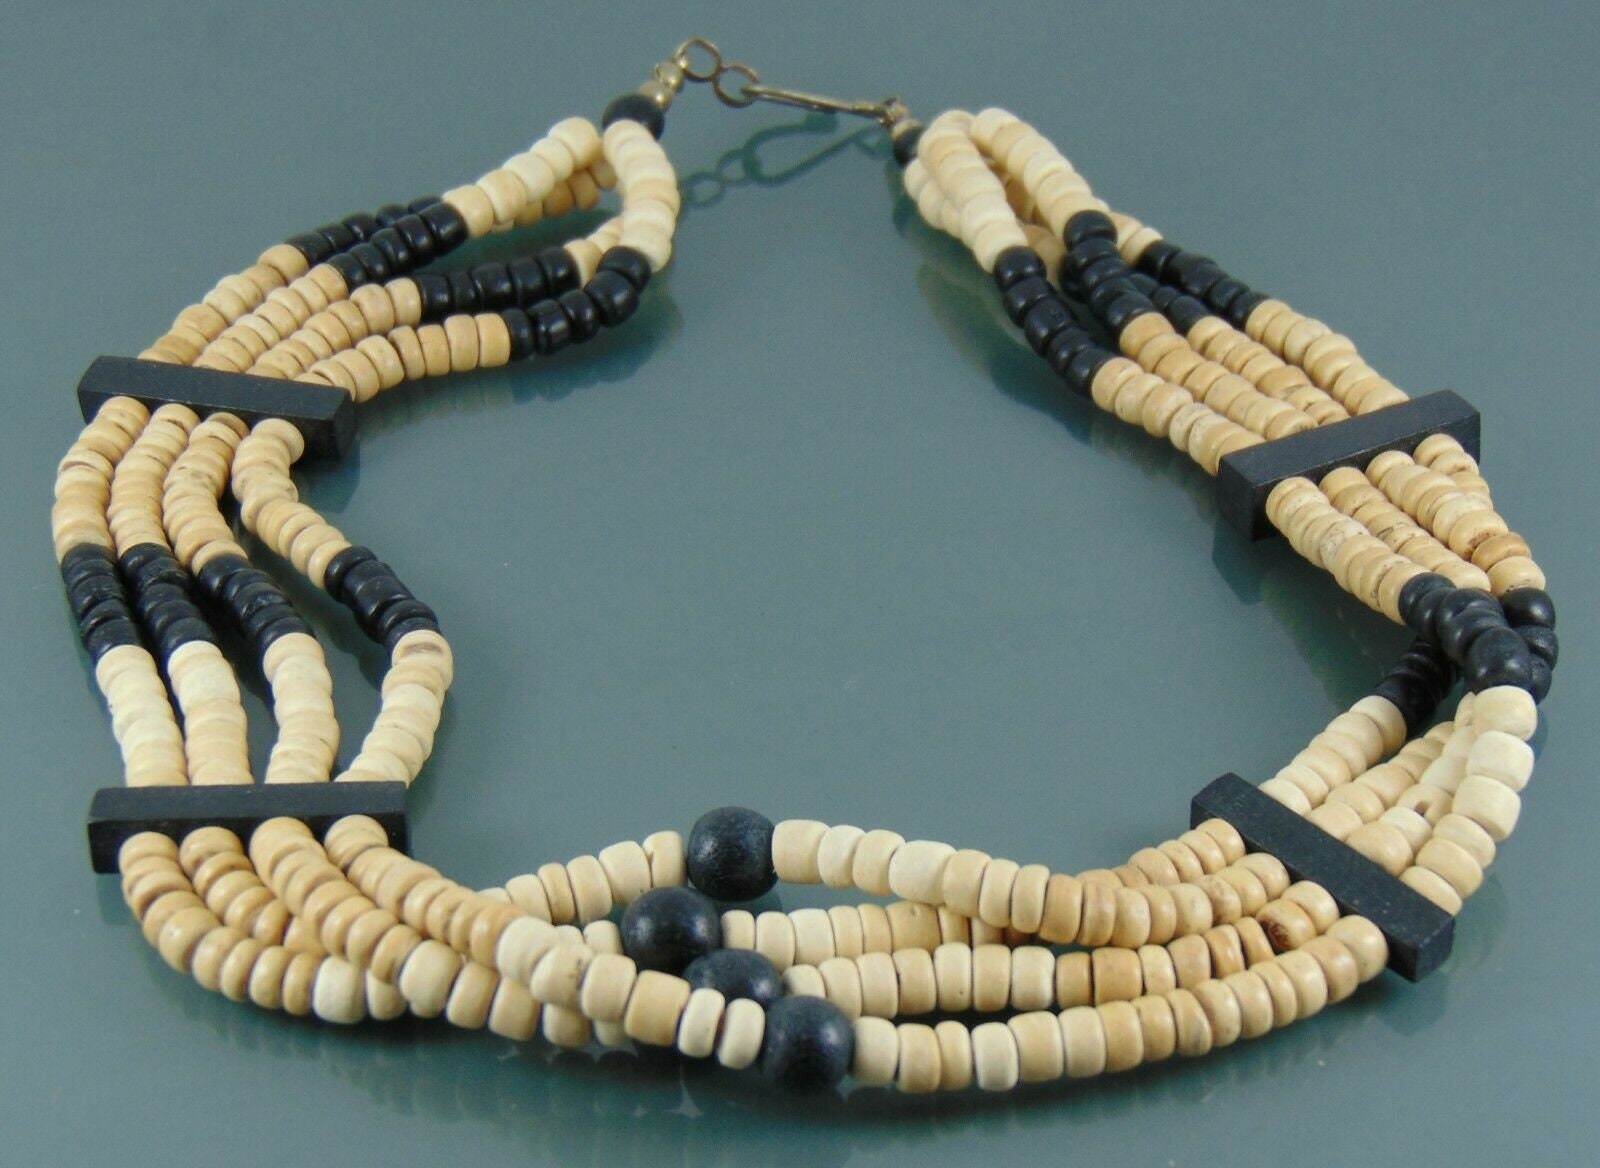 Black and beige necklace with four tiers of ceramic beads and wooden bars Brand new.